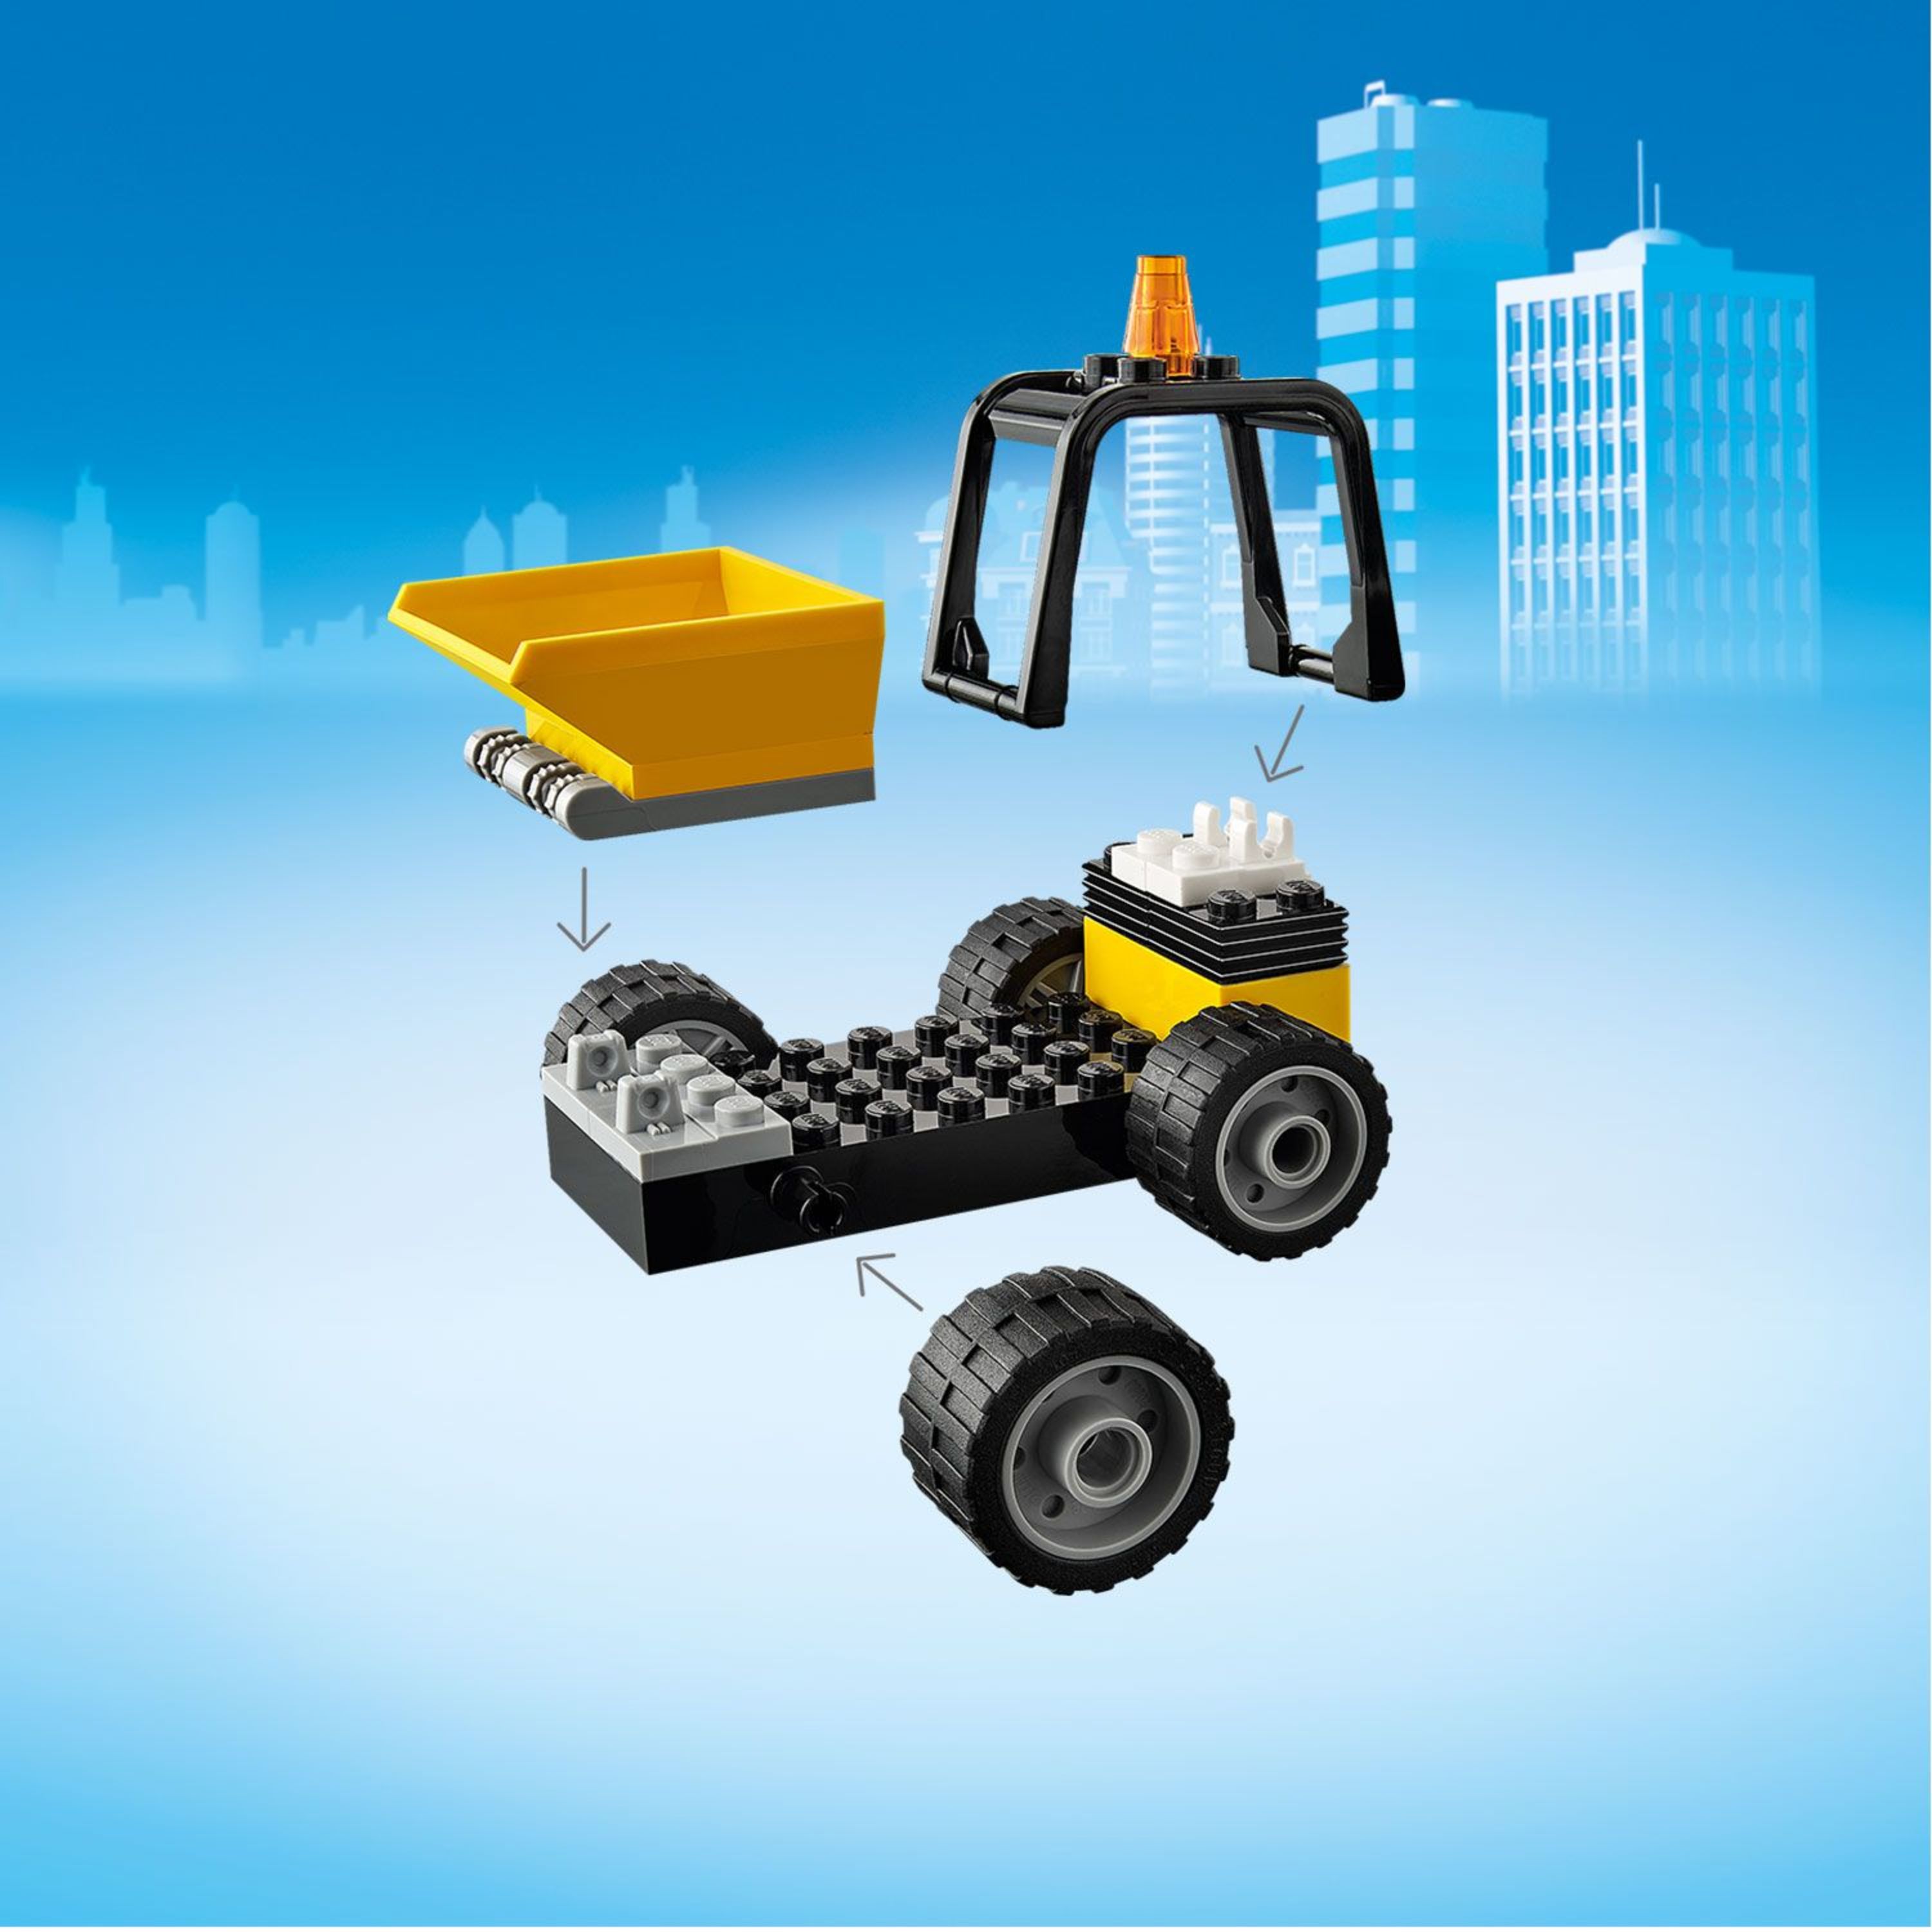 LEGO City Roadwork Truck 60284 Building Toy; Cool Roadworks Construction Set for Kids (58 Pieces) - image 4 of 7